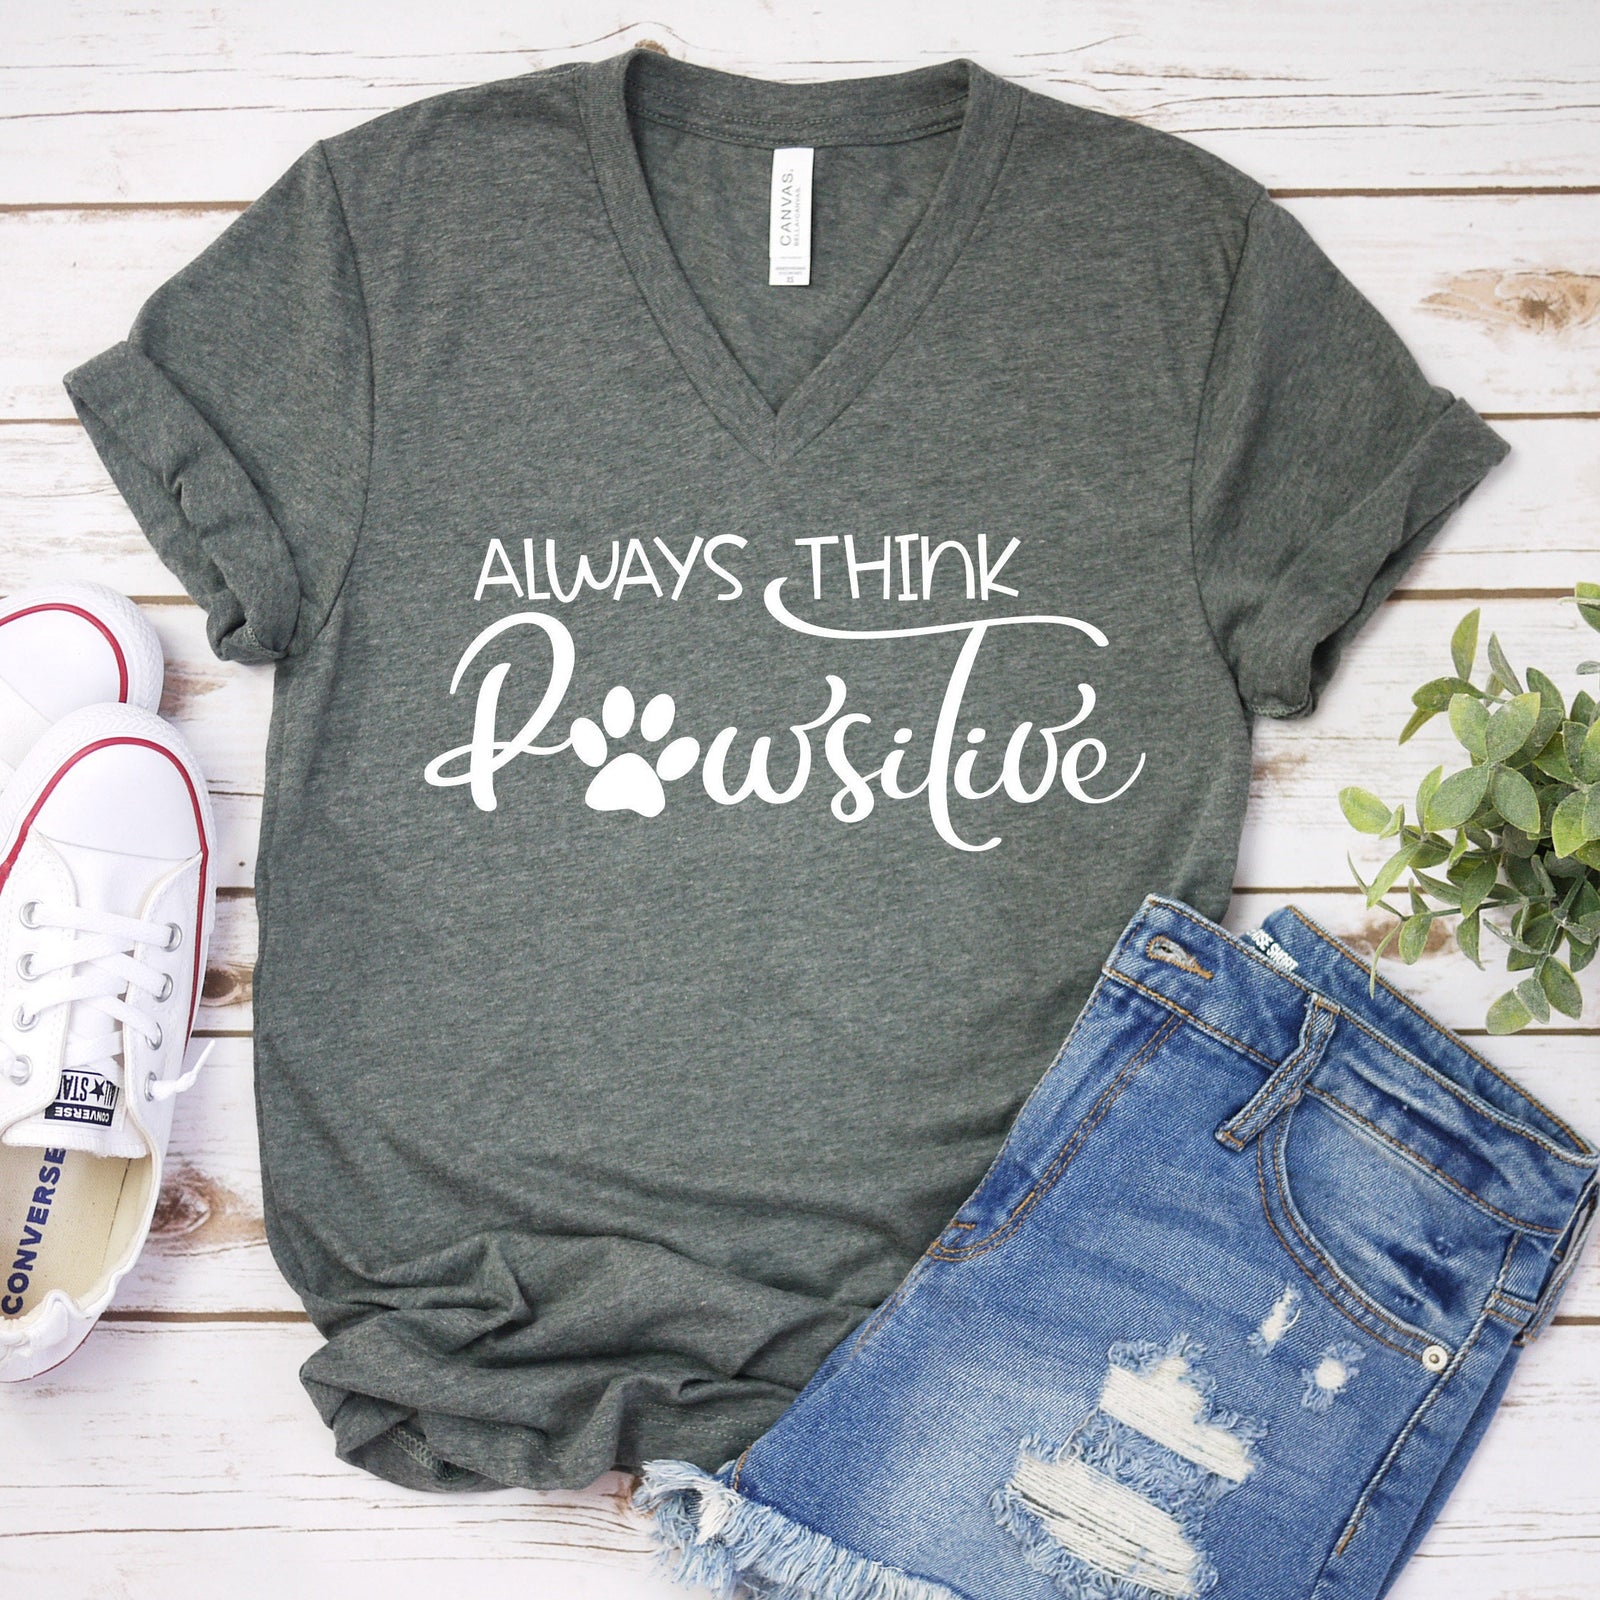 Always Think Pawsitive T Shirt - Funny Dog Lover Shirt - Pet Rescue T Shirt - Dog Mom Shirt Gift - Puppy Paw Shirt